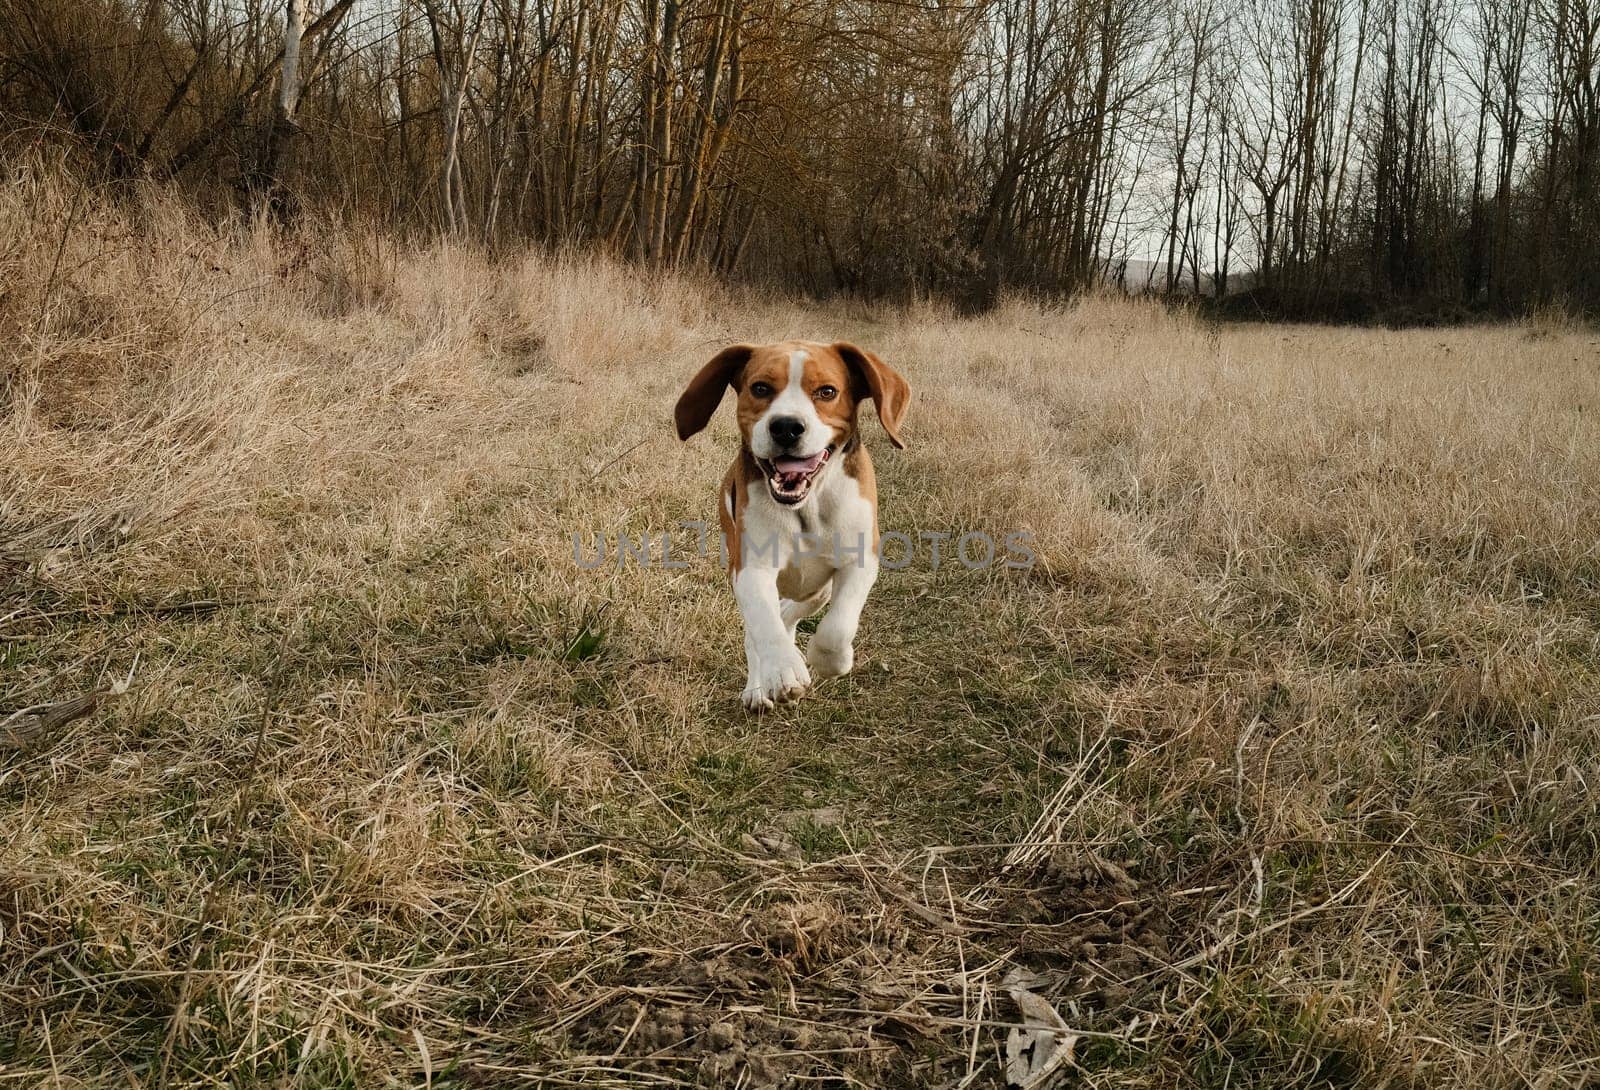 Running beagle puppy in autumn grass outdoor. Cute dog on playing on nature background outside city. Adorable young doggy. High quality photo